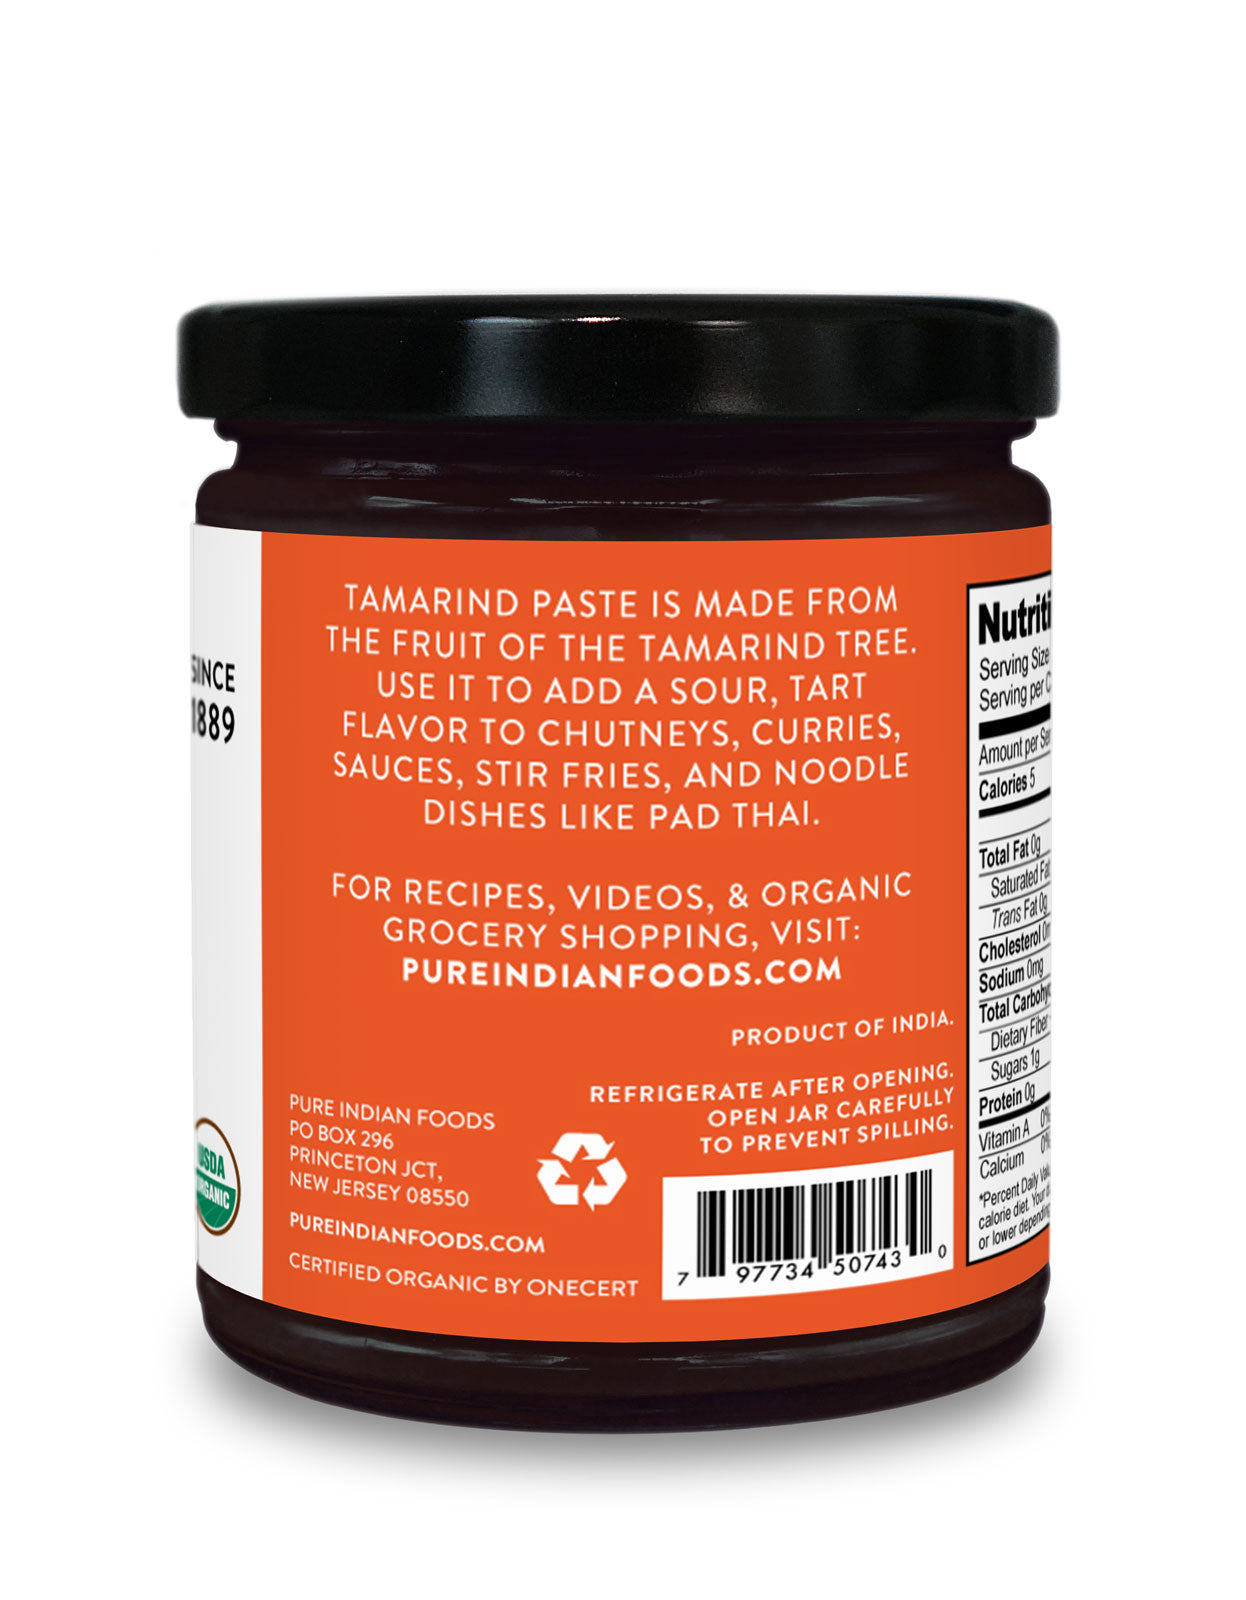 Back label of Pure Indian Foods Organic Tamarind Paste. Says "Tamarind Paste is made from the fruit of the Tamarind tree. Use it to add a sour, tart flavor to chutneys, curries, sauces, stir fries, and noodle dishes like Pad Thai." Refrigerate after opening. Visit our website for recipes and videos.